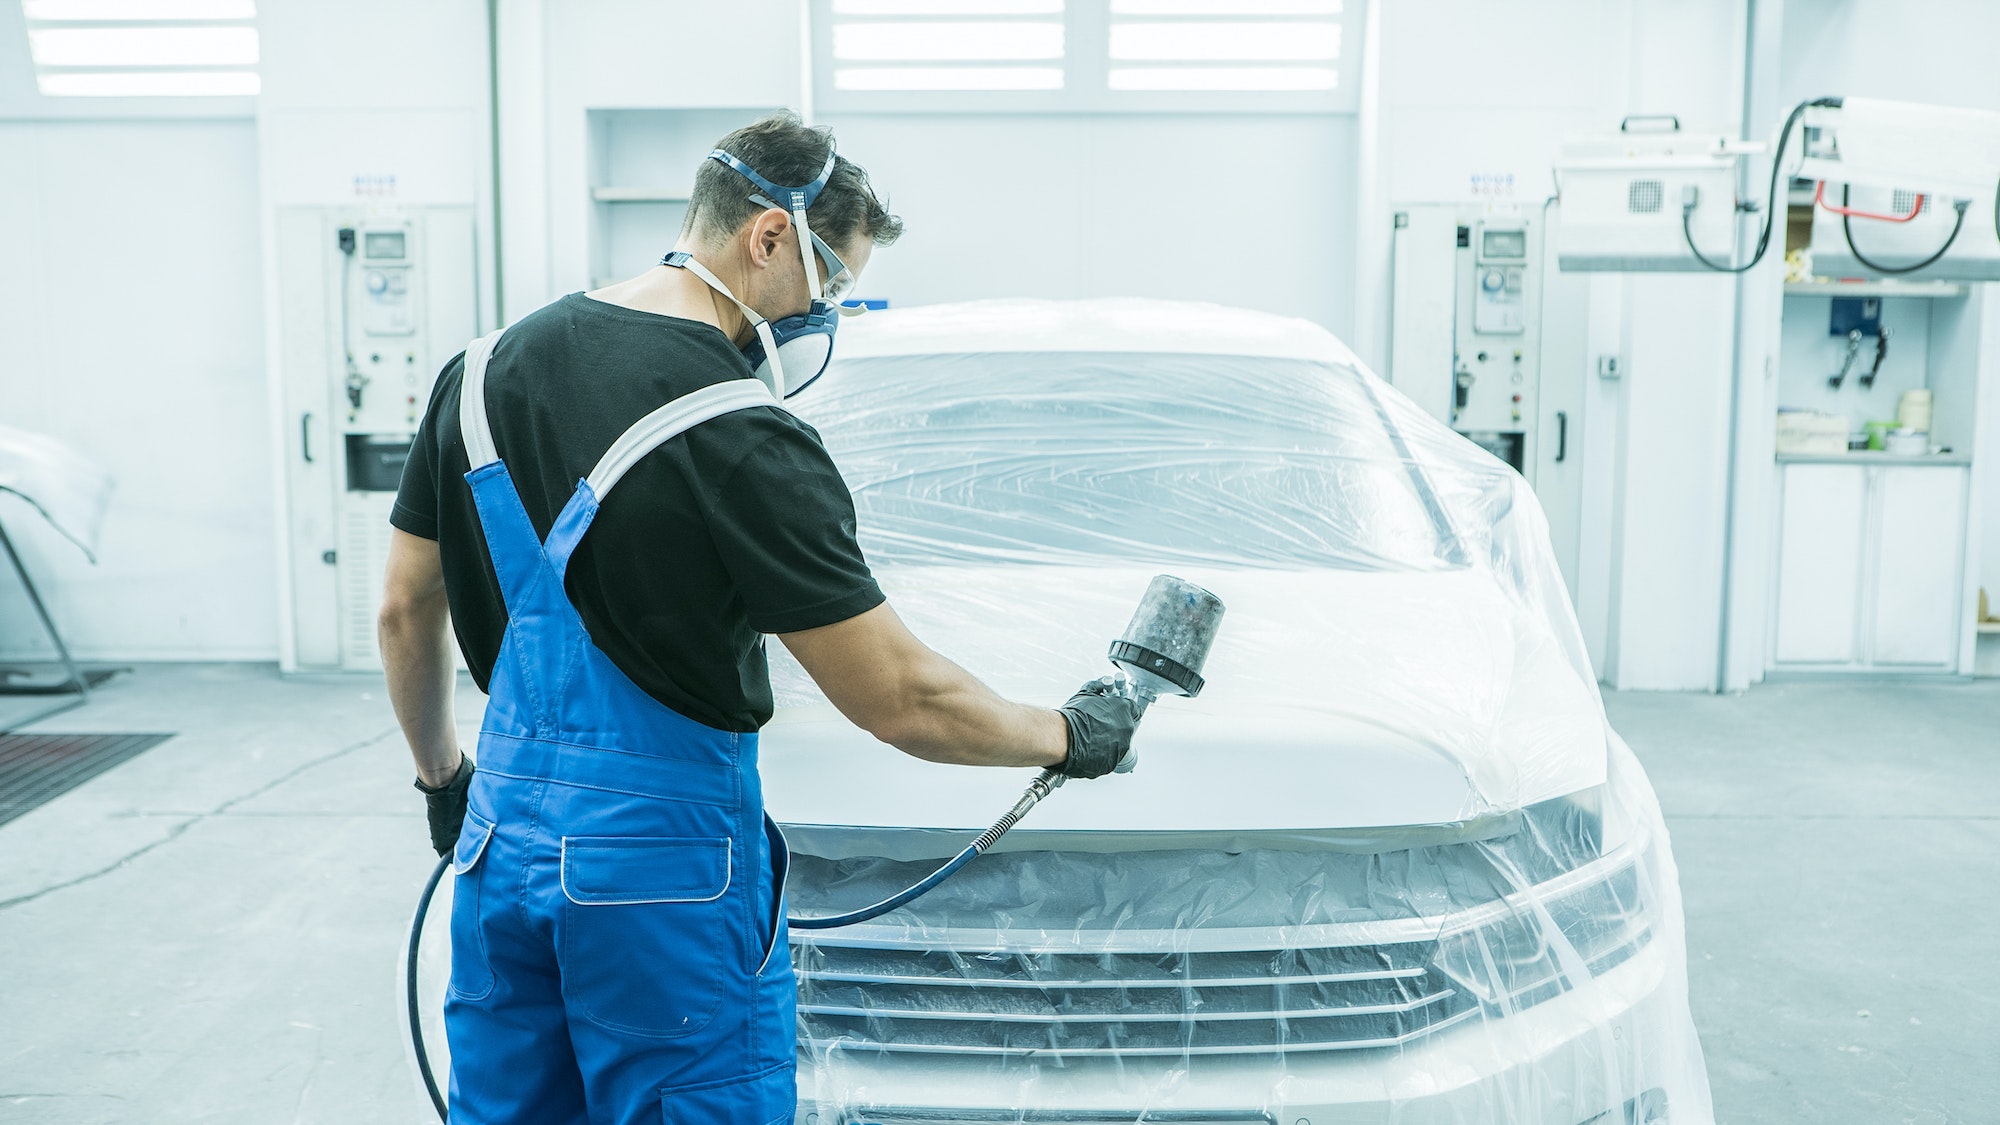 A car painter wearing protective clothing paints a car with an airbrush in an auto repair shop.